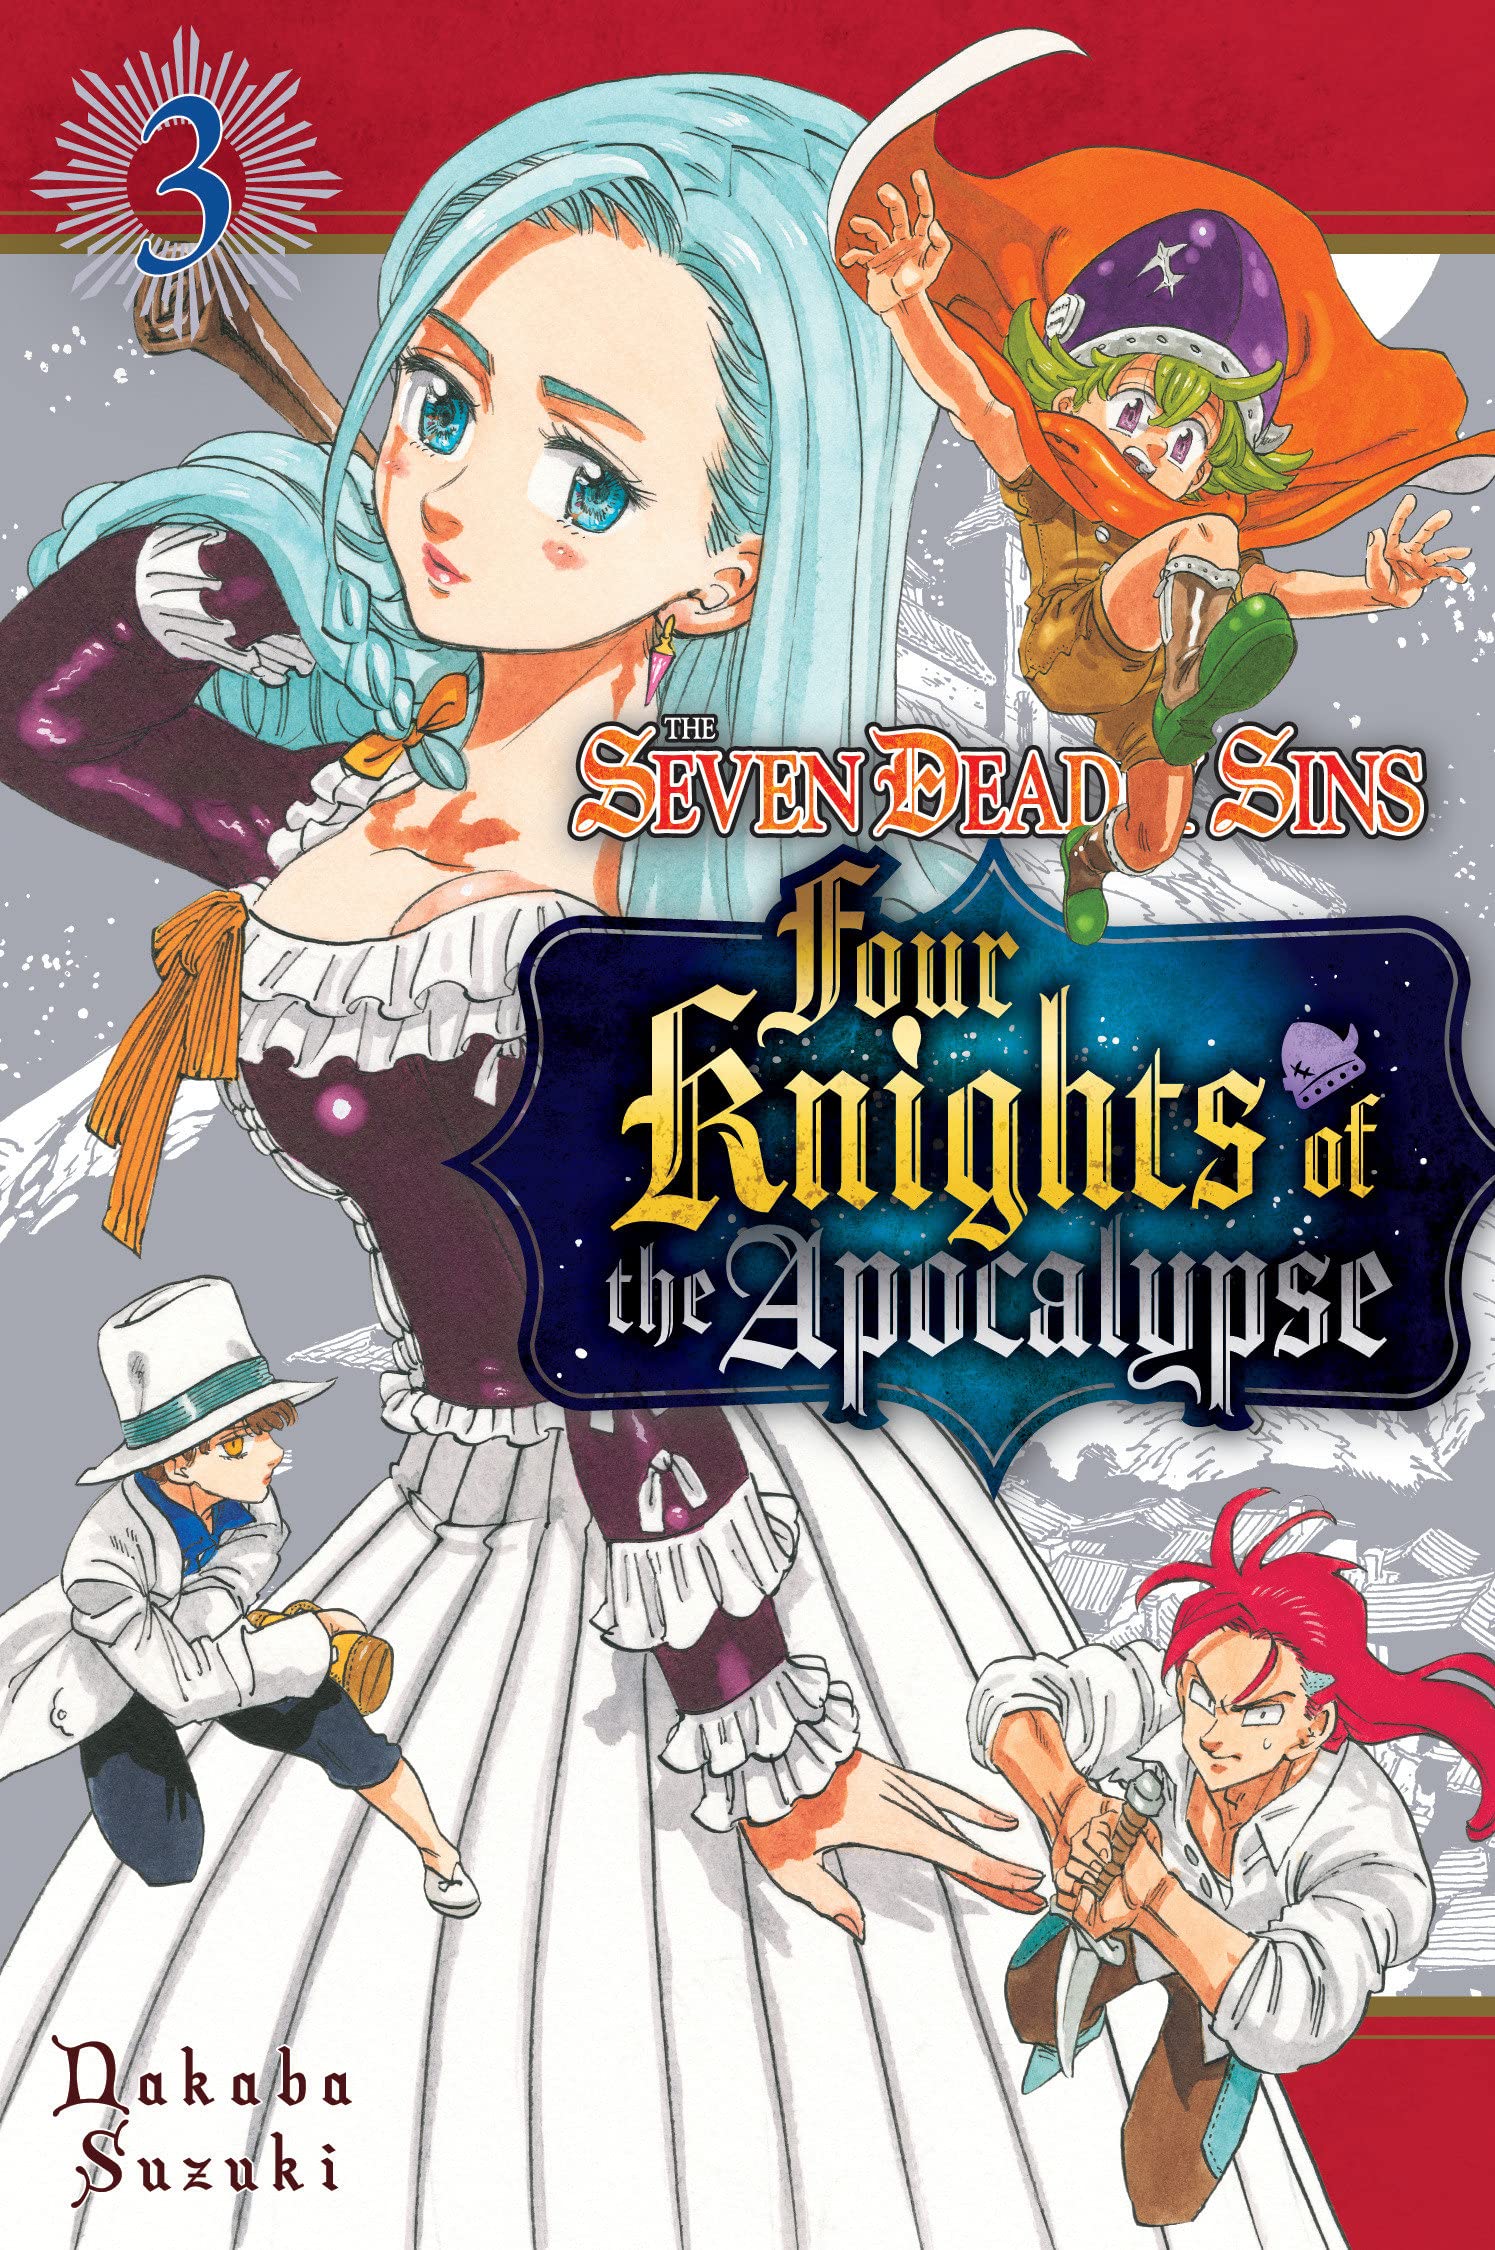 The Seven Deadly Sins: Four Knights of the Apocalypse - Volume 3